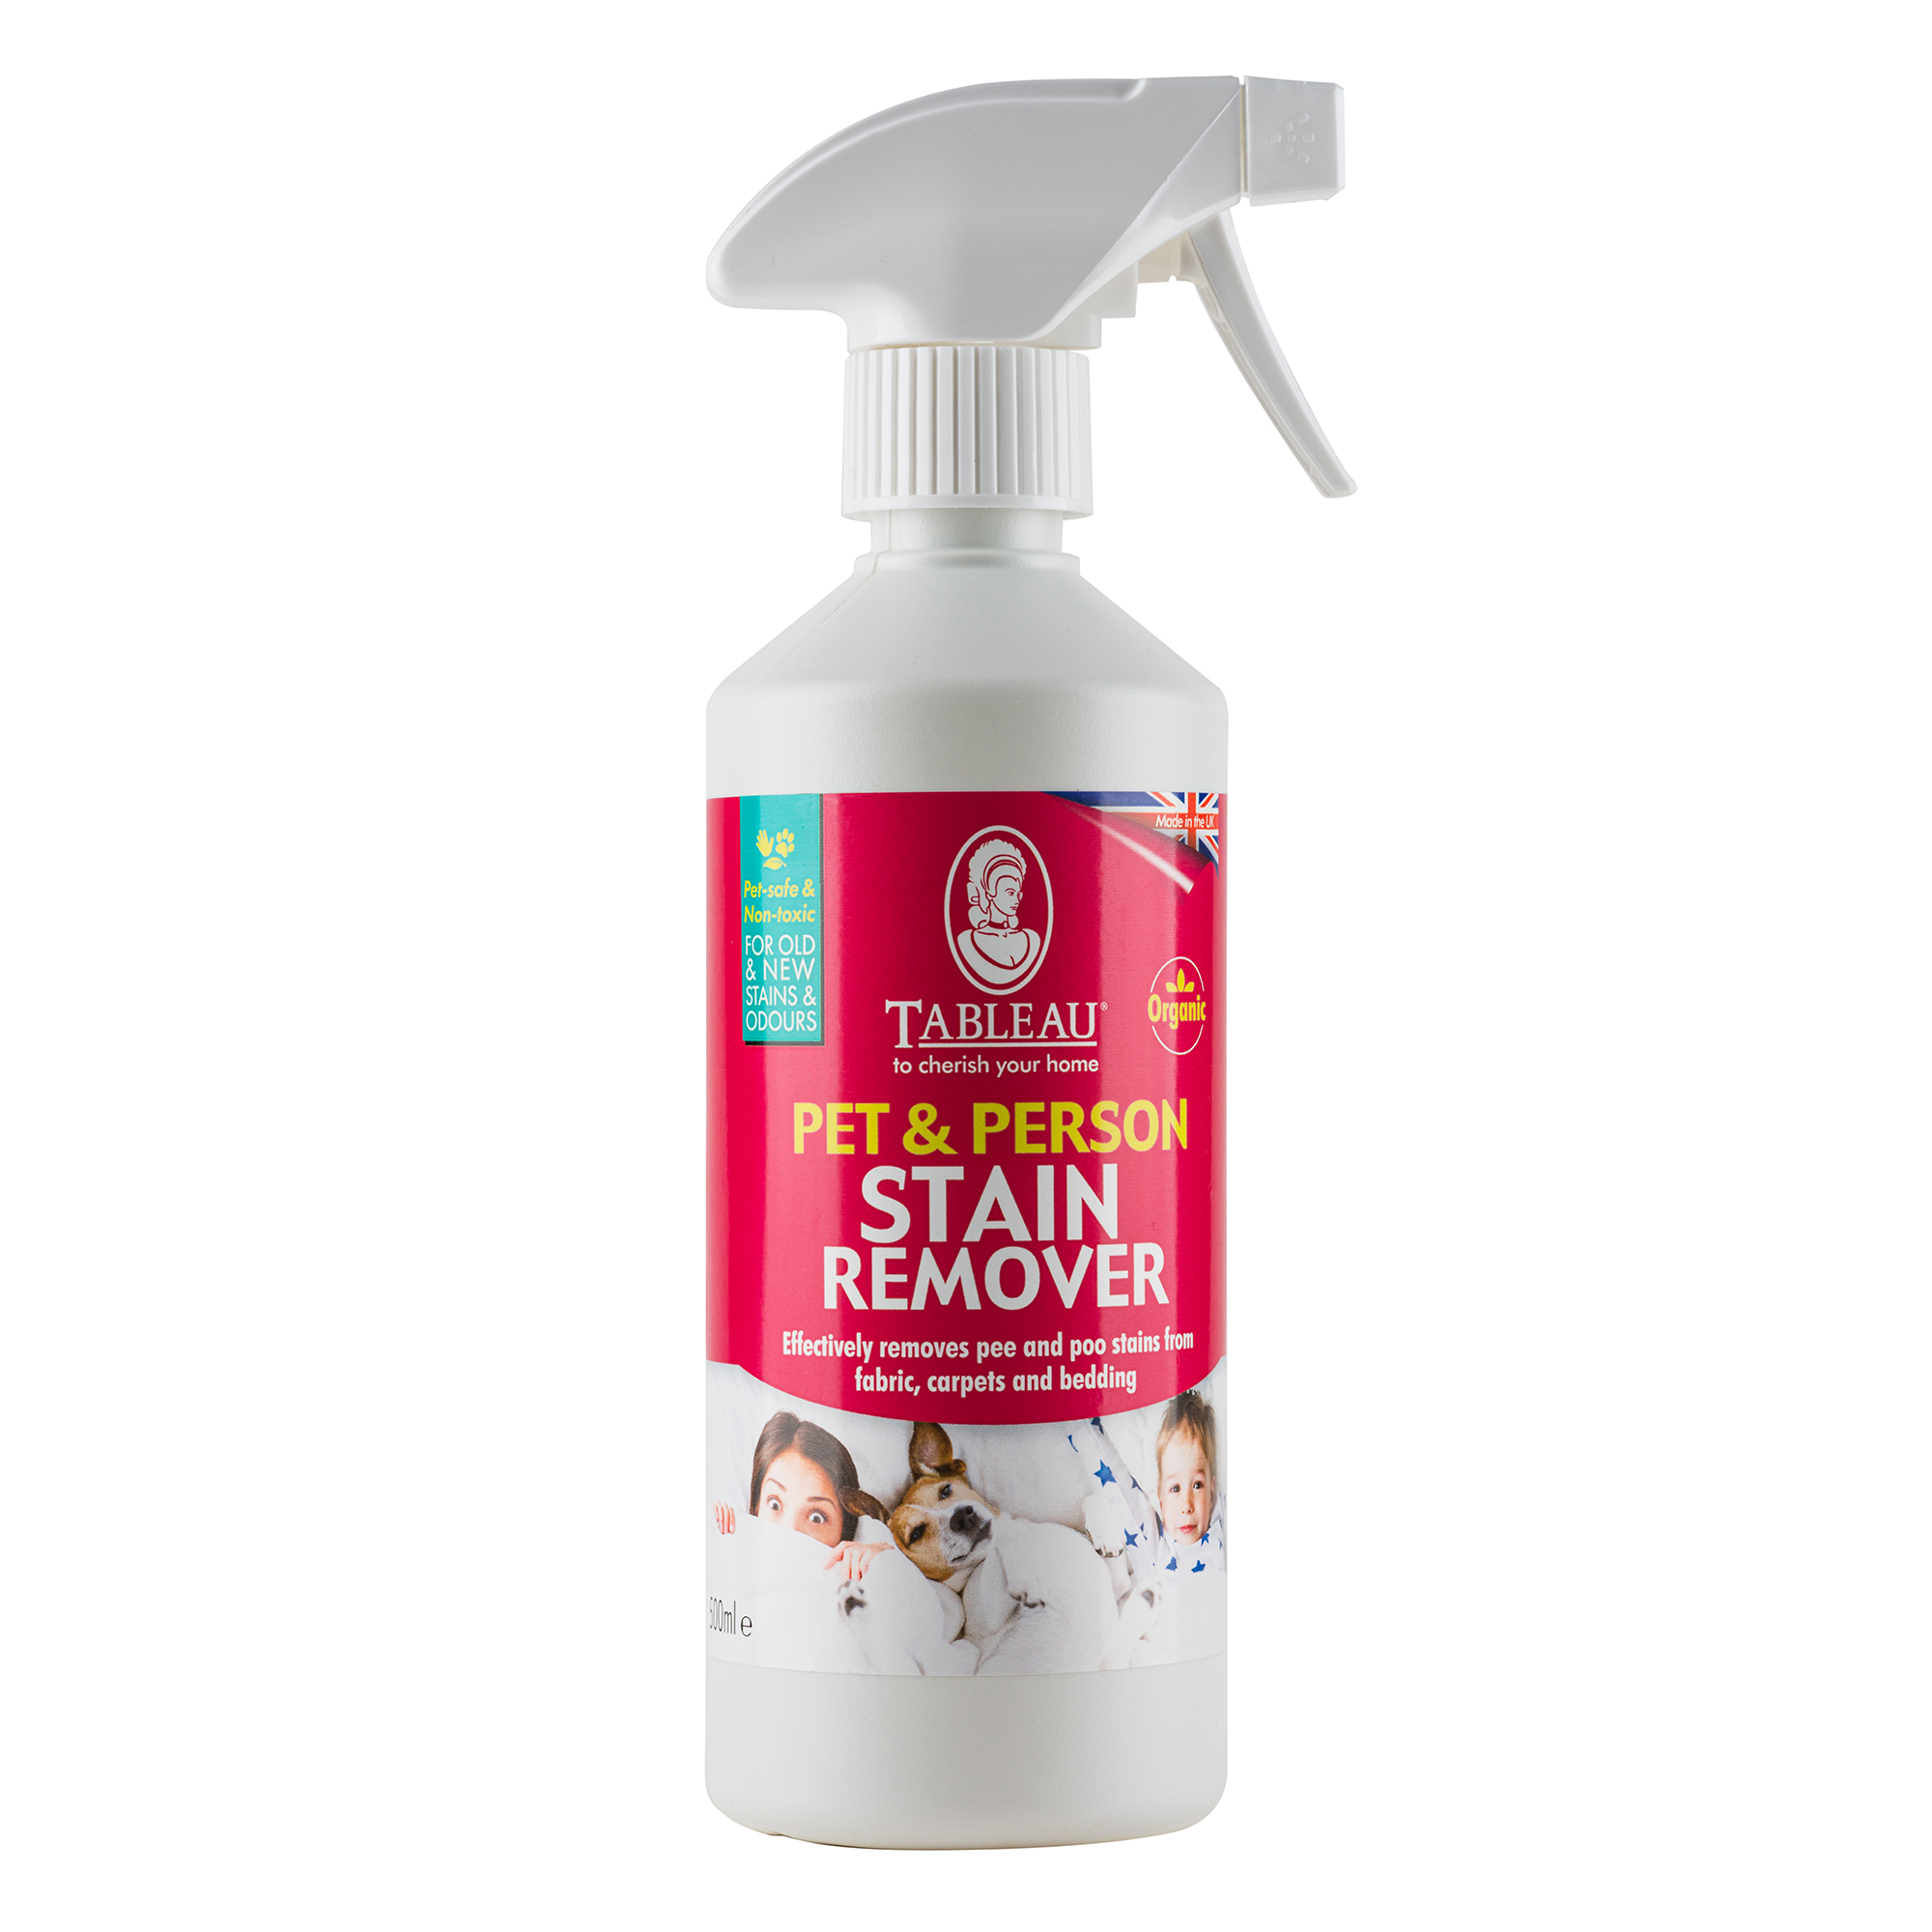 Pet & Person Stain Remover